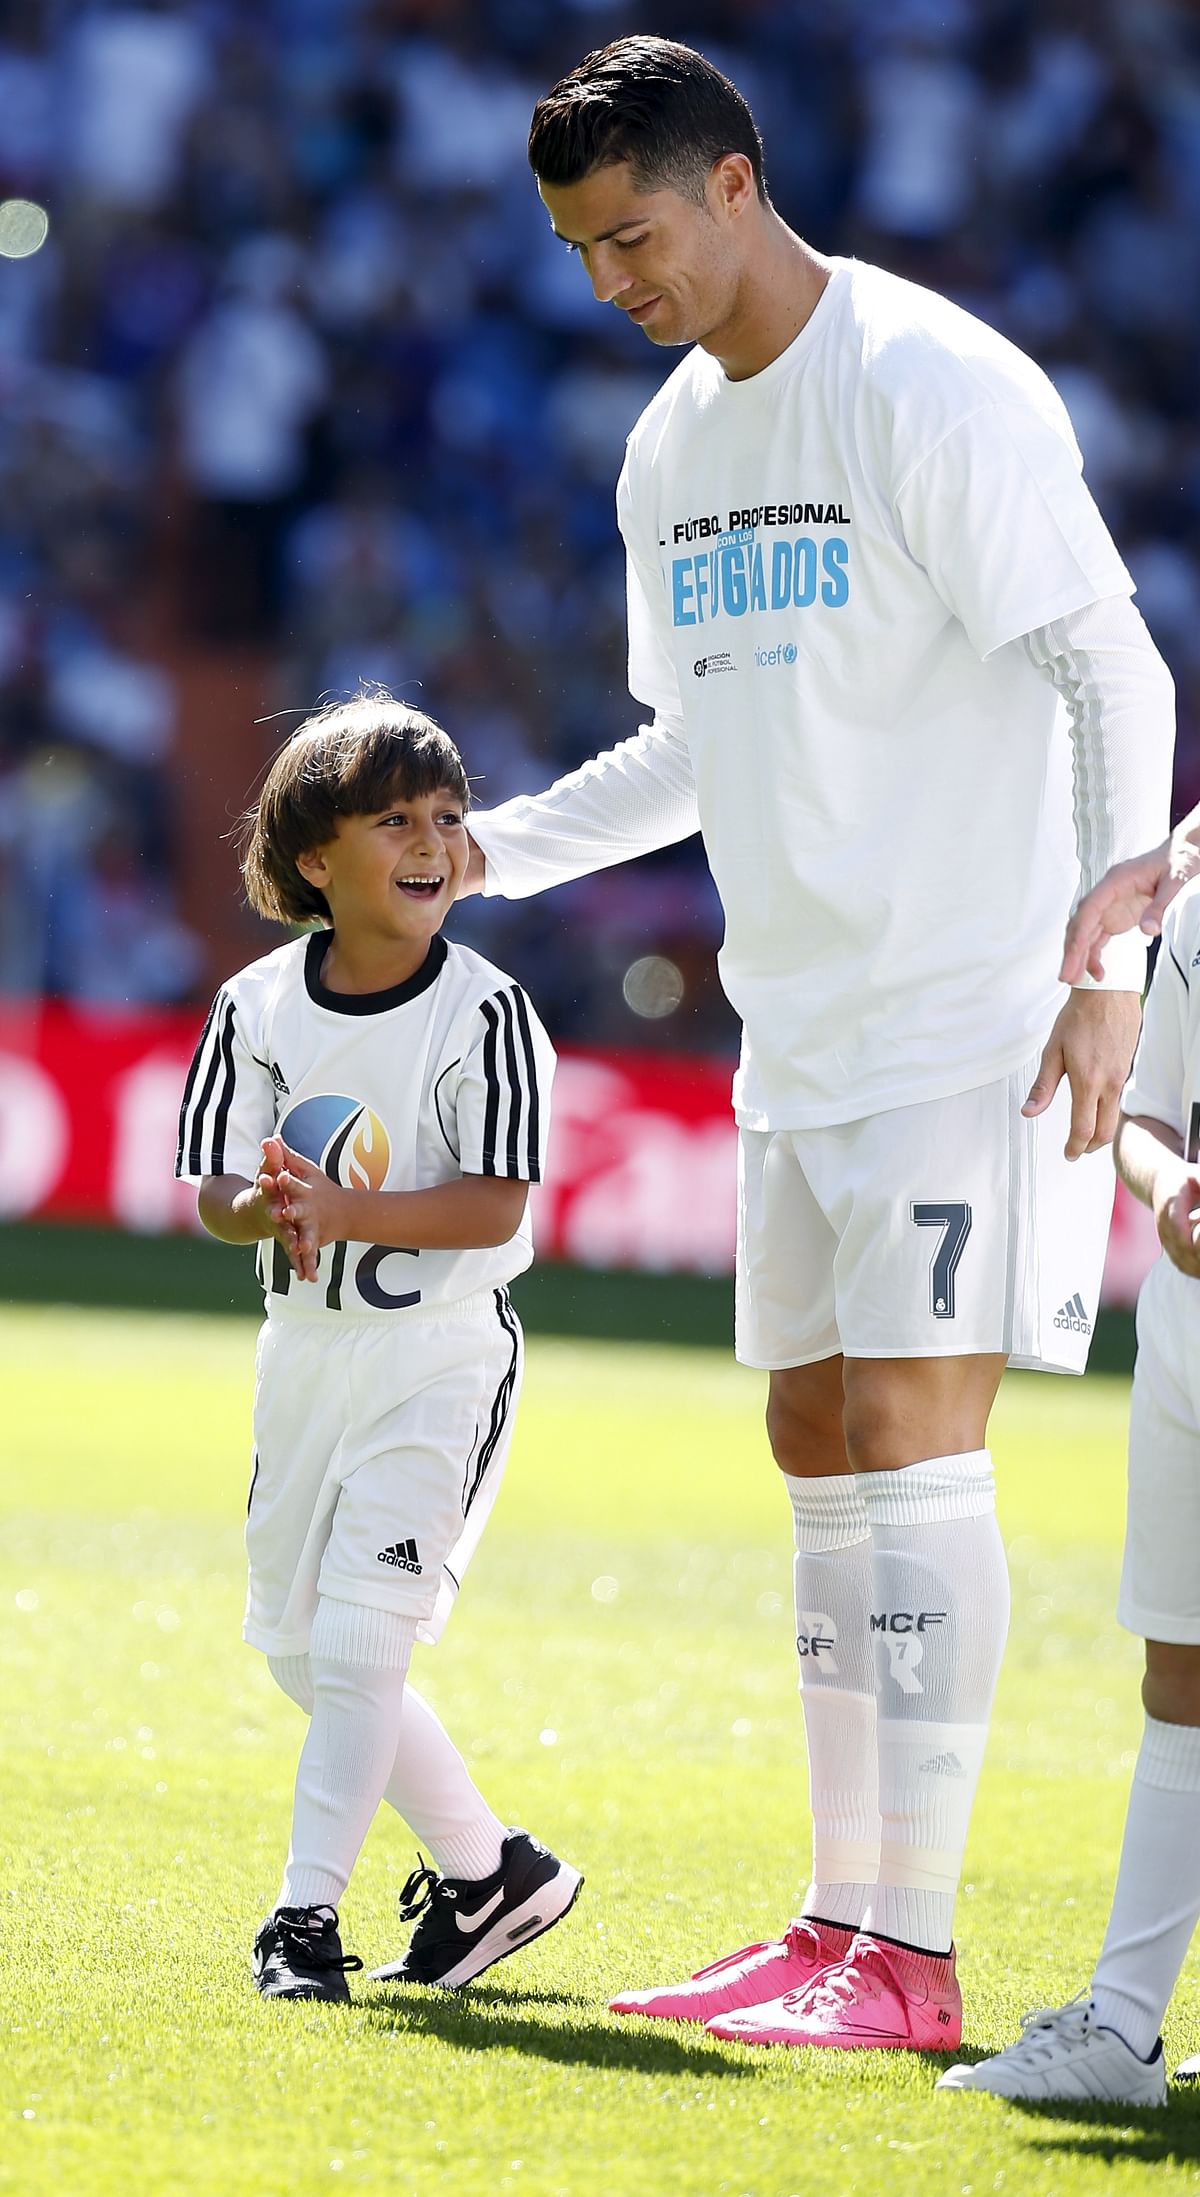 The Syrian father and his son who were tripped by the journo were Real Madrid’s special guests on Saturday.